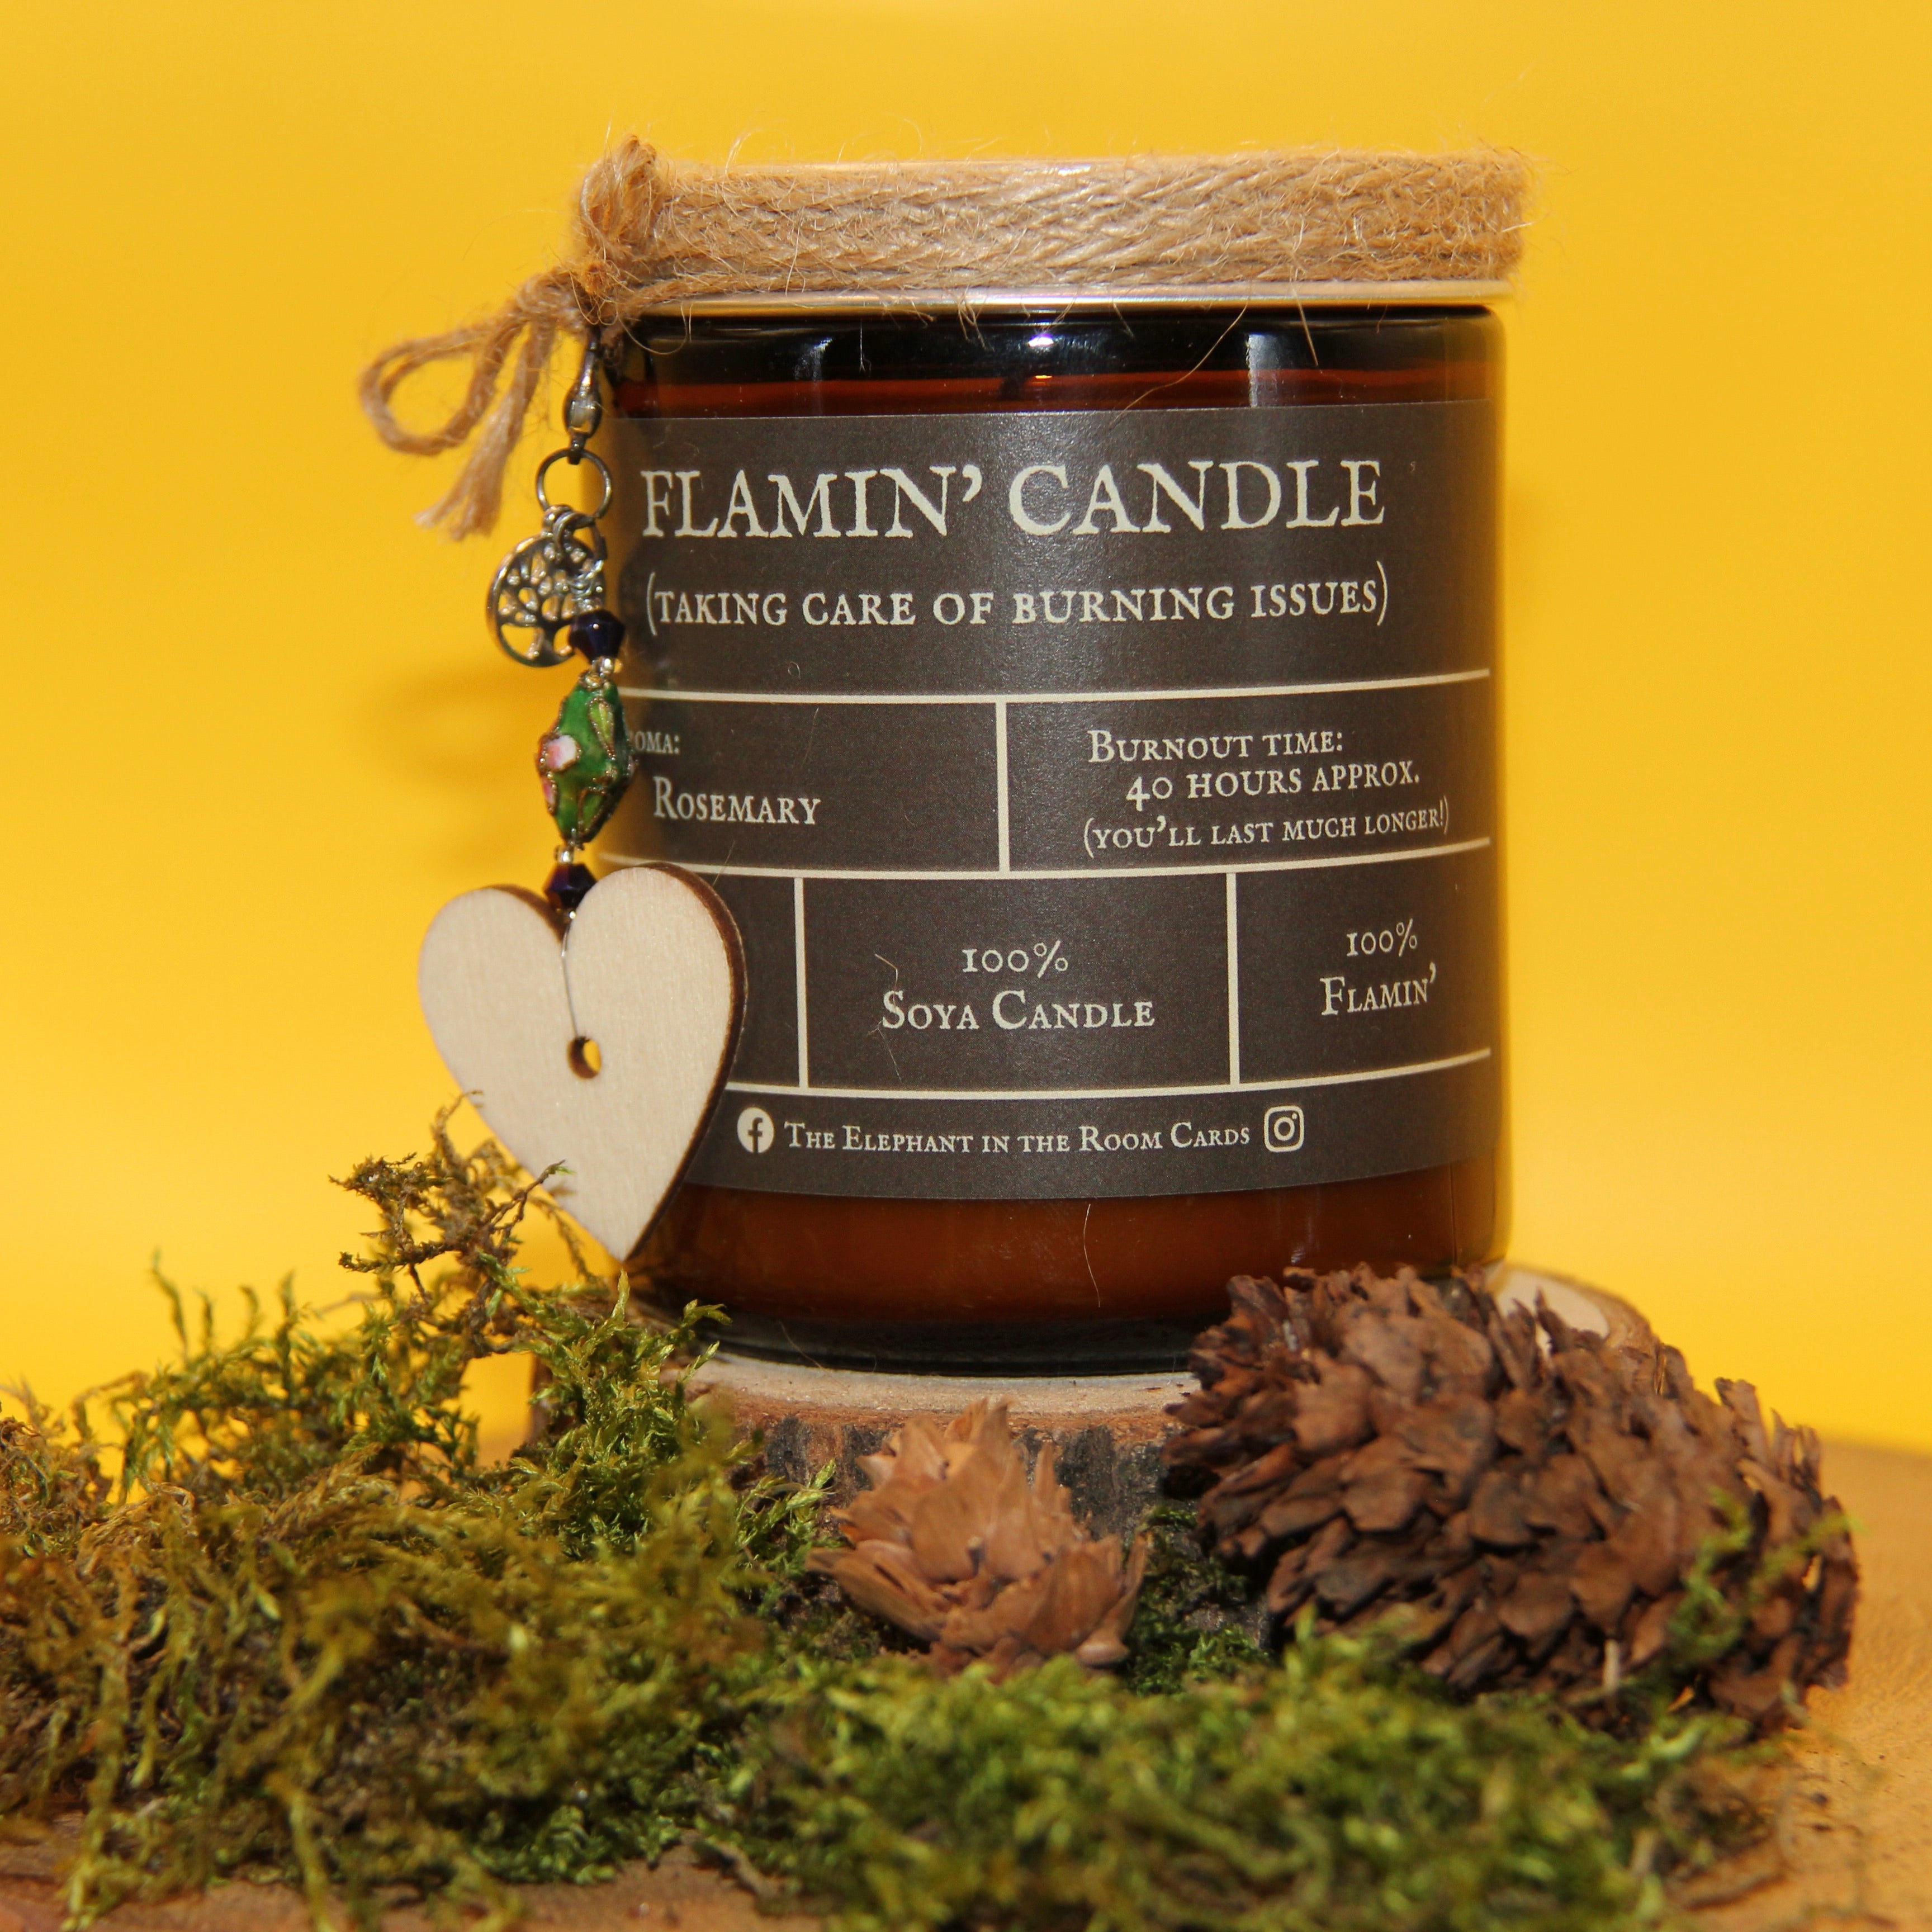 Flamin' Candle (Taking Care of Burning Issues) - Rosemary Scented